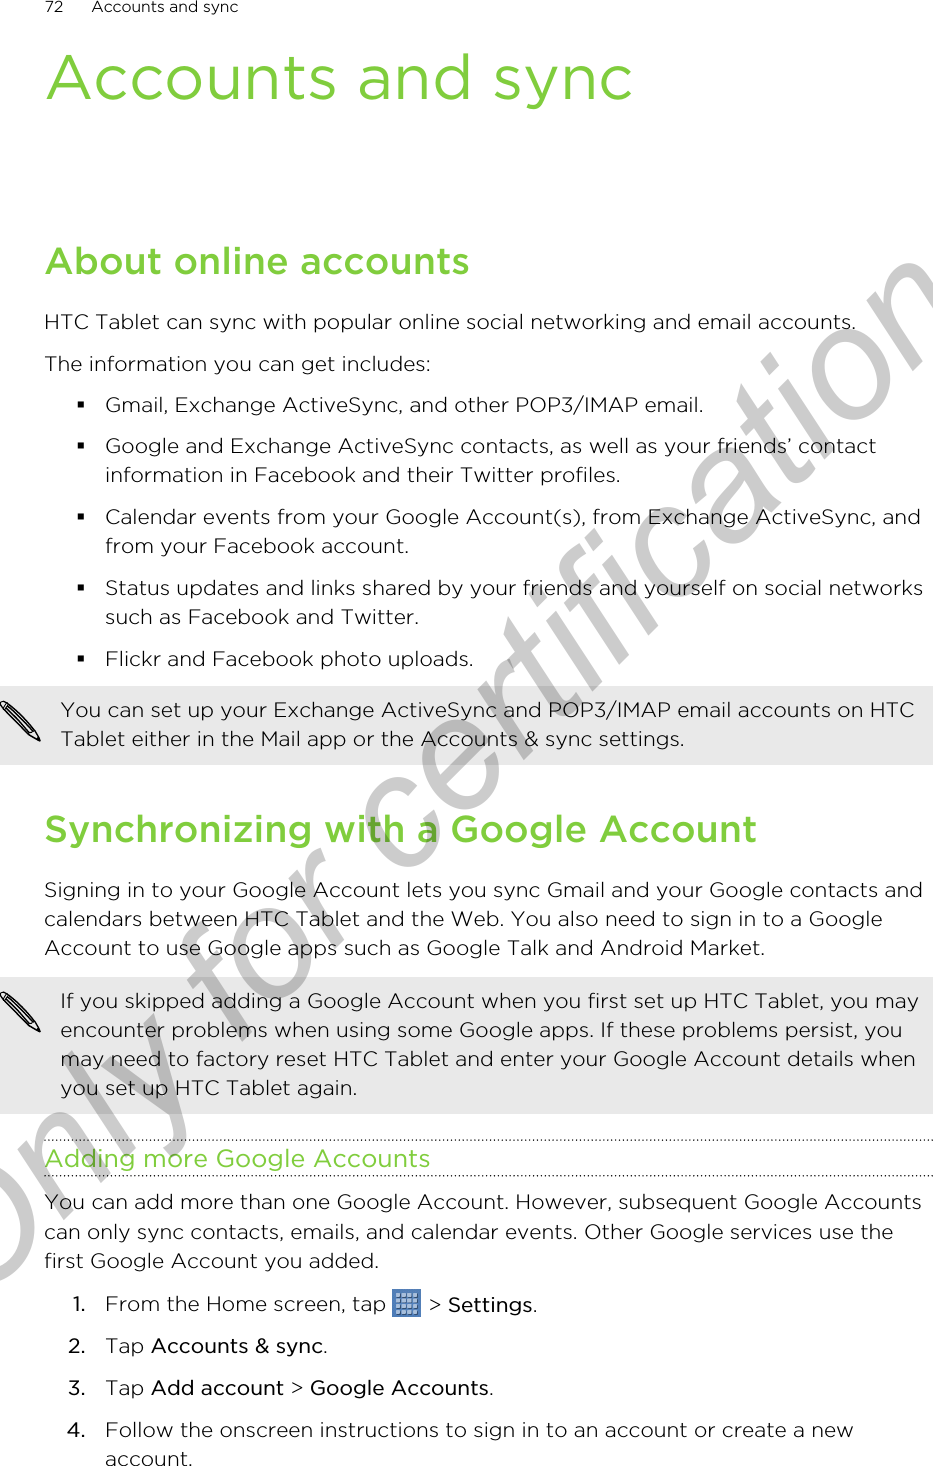 Accounts and syncAbout online accountsHTC Tablet can sync with popular online social networking and email accounts.The information you can get includes:§Gmail, Exchange ActiveSync, and other POP3/IMAP email.§Google and Exchange ActiveSync contacts, as well as your friends’ contactinformation in Facebook and their Twitter profiles.§Calendar events from your Google Account(s), from Exchange ActiveSync, andfrom your Facebook account.§Status updates and links shared by your friends and yourself on social networkssuch as Facebook and Twitter.§Flickr and Facebook photo uploads.You can set up your Exchange ActiveSync and POP3/IMAP email accounts on HTCTablet either in the Mail app or the Accounts &amp; sync settings.Synchronizing with a Google AccountSigning in to your Google Account lets you sync Gmail and your Google contacts andcalendars between HTC Tablet and the Web. You also need to sign in to a GoogleAccount to use Google apps such as Google Talk and Android Market.If you skipped adding a Google Account when you first set up HTC Tablet, you mayencounter problems when using some Google apps. If these problems persist, youmay need to factory reset HTC Tablet and enter your Google Account details whenyou set up HTC Tablet again.Adding more Google AccountsYou can add more than one Google Account. However, subsequent Google Accountscan only sync contacts, emails, and calendar events. Other Google services use thefirst Google Account you added.1. From the Home screen, tap   &gt; Settings.2. Tap Accounts &amp; sync.3. Tap Add account &gt; Google Accounts.4. Follow the onscreen instructions to sign in to an account or create a newaccount.72 Accounts and syncOnly for certification